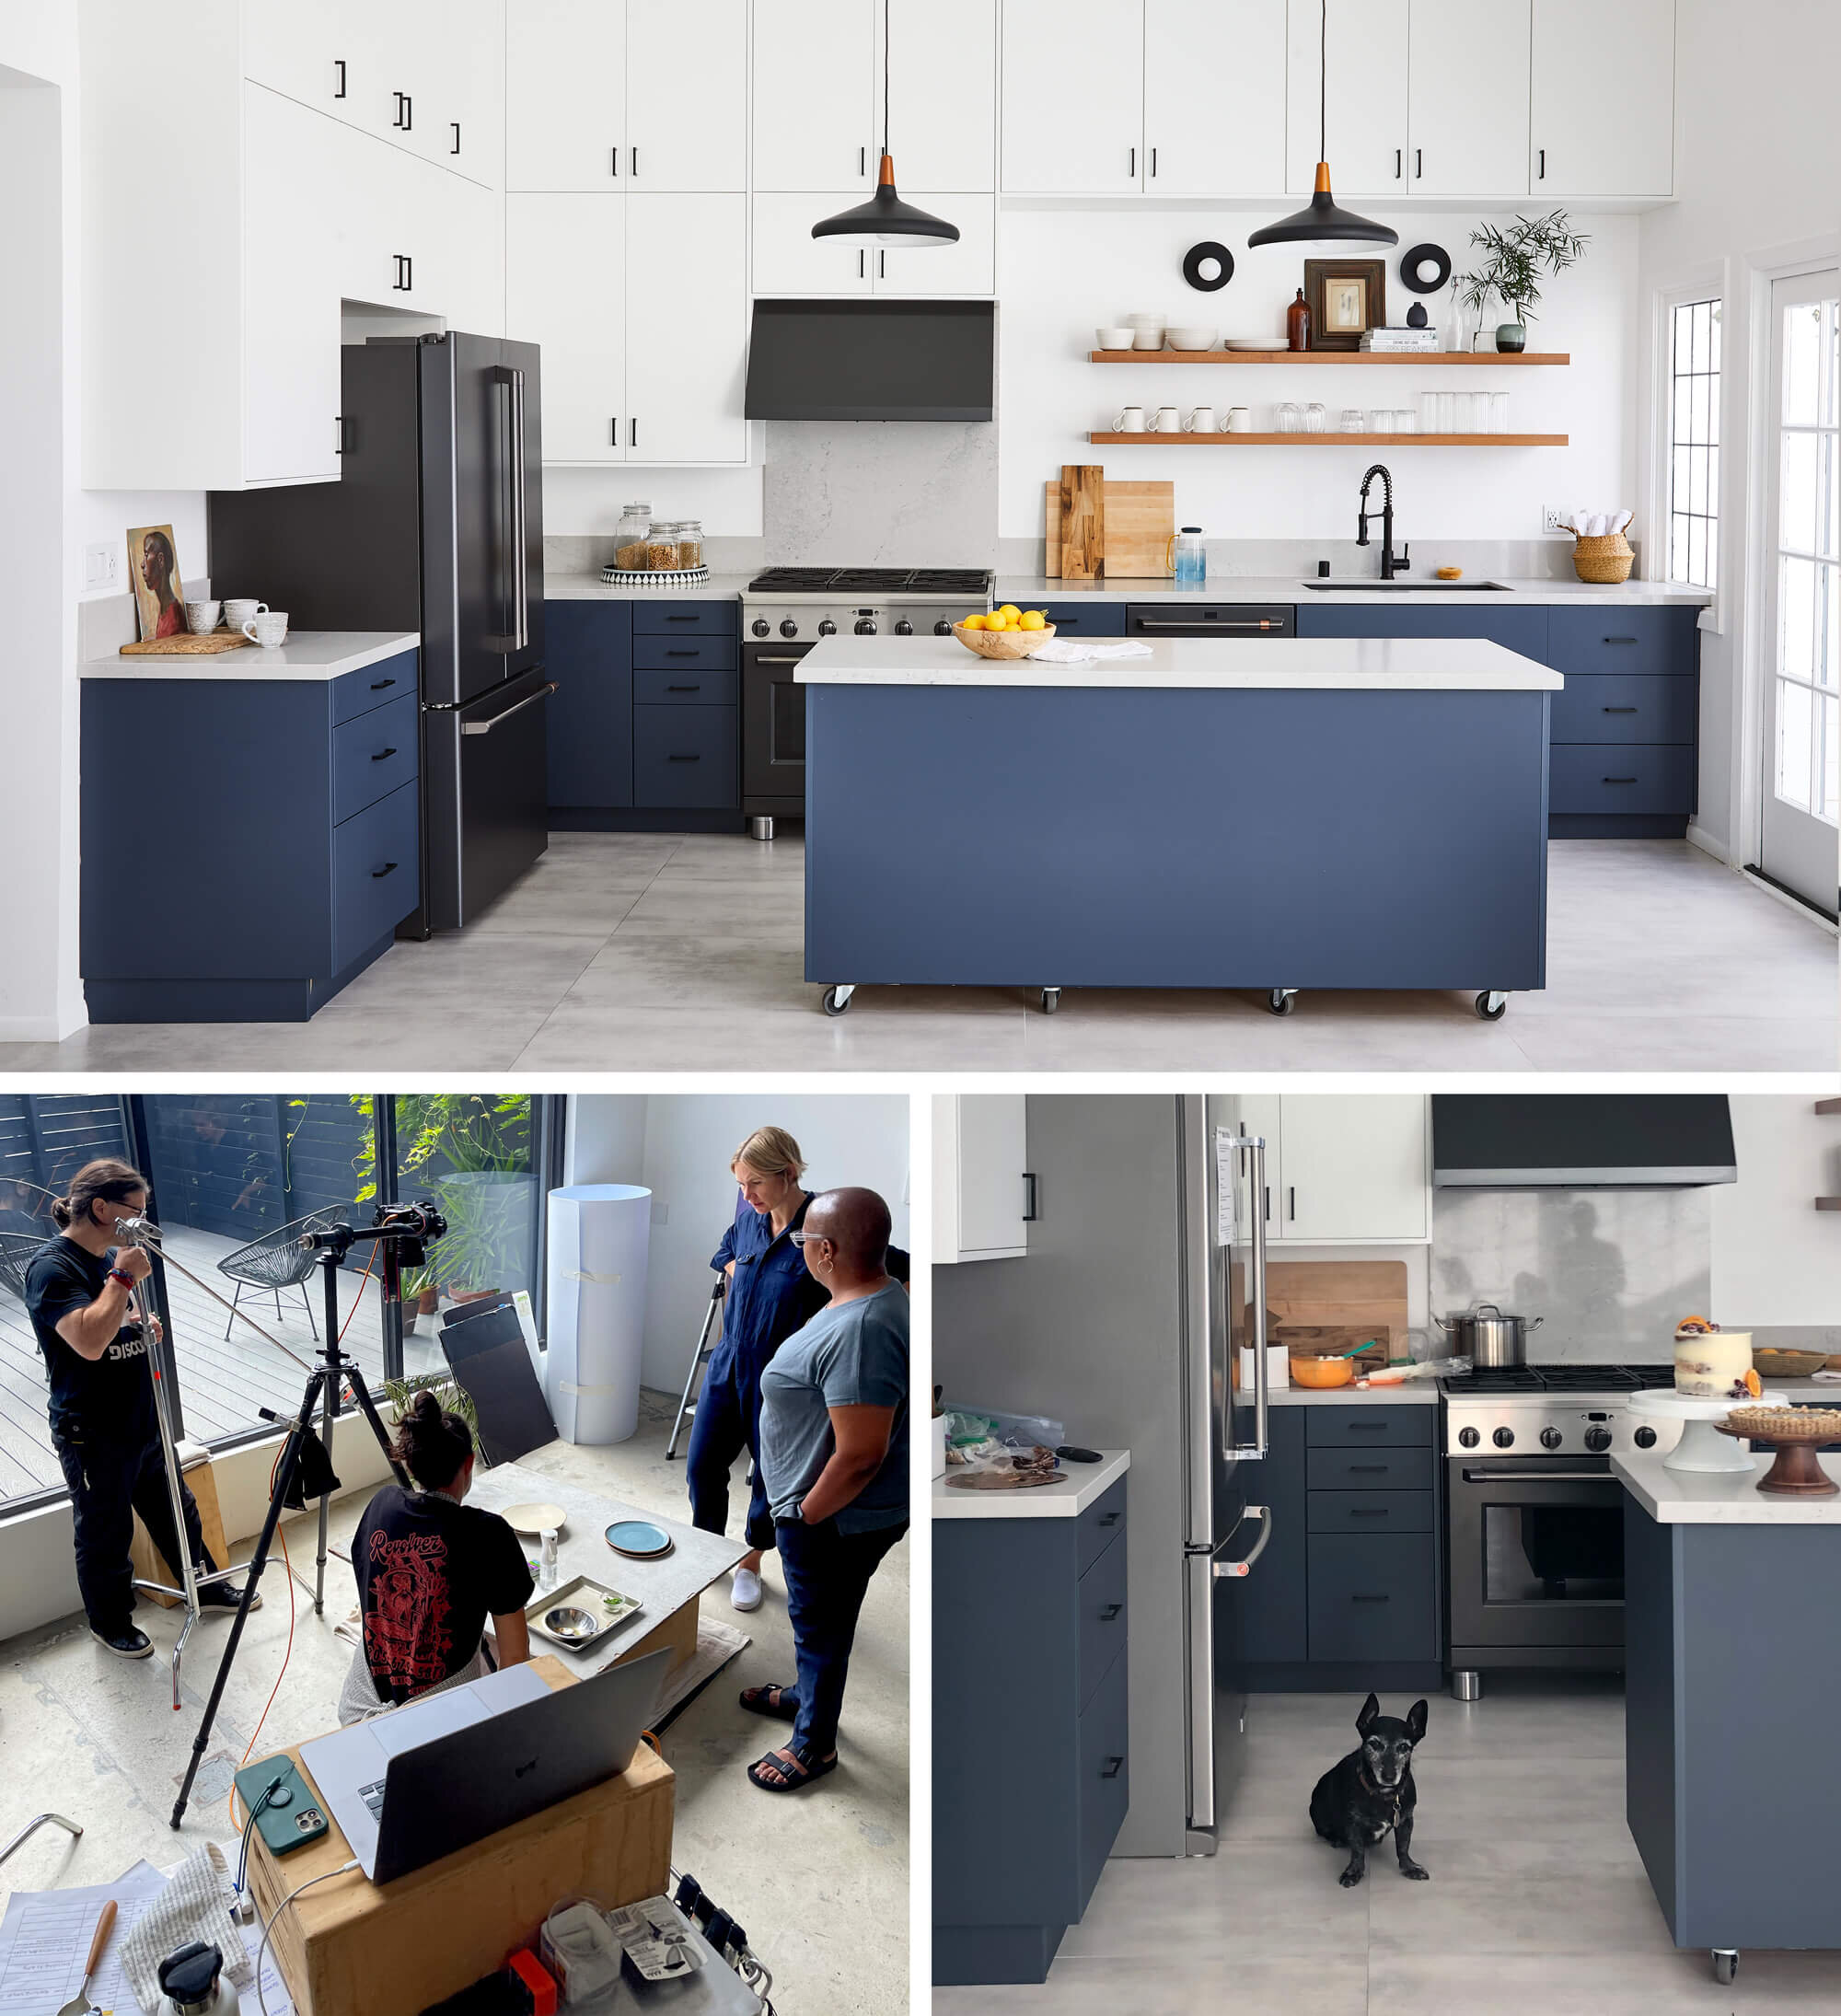 Three images: The first is a view of a bright kitchen with cabinets to ceiling. The second one is of the photographer's team prepping for shoot. The third is the same kitchen as above with a small dog center looking at camera. 